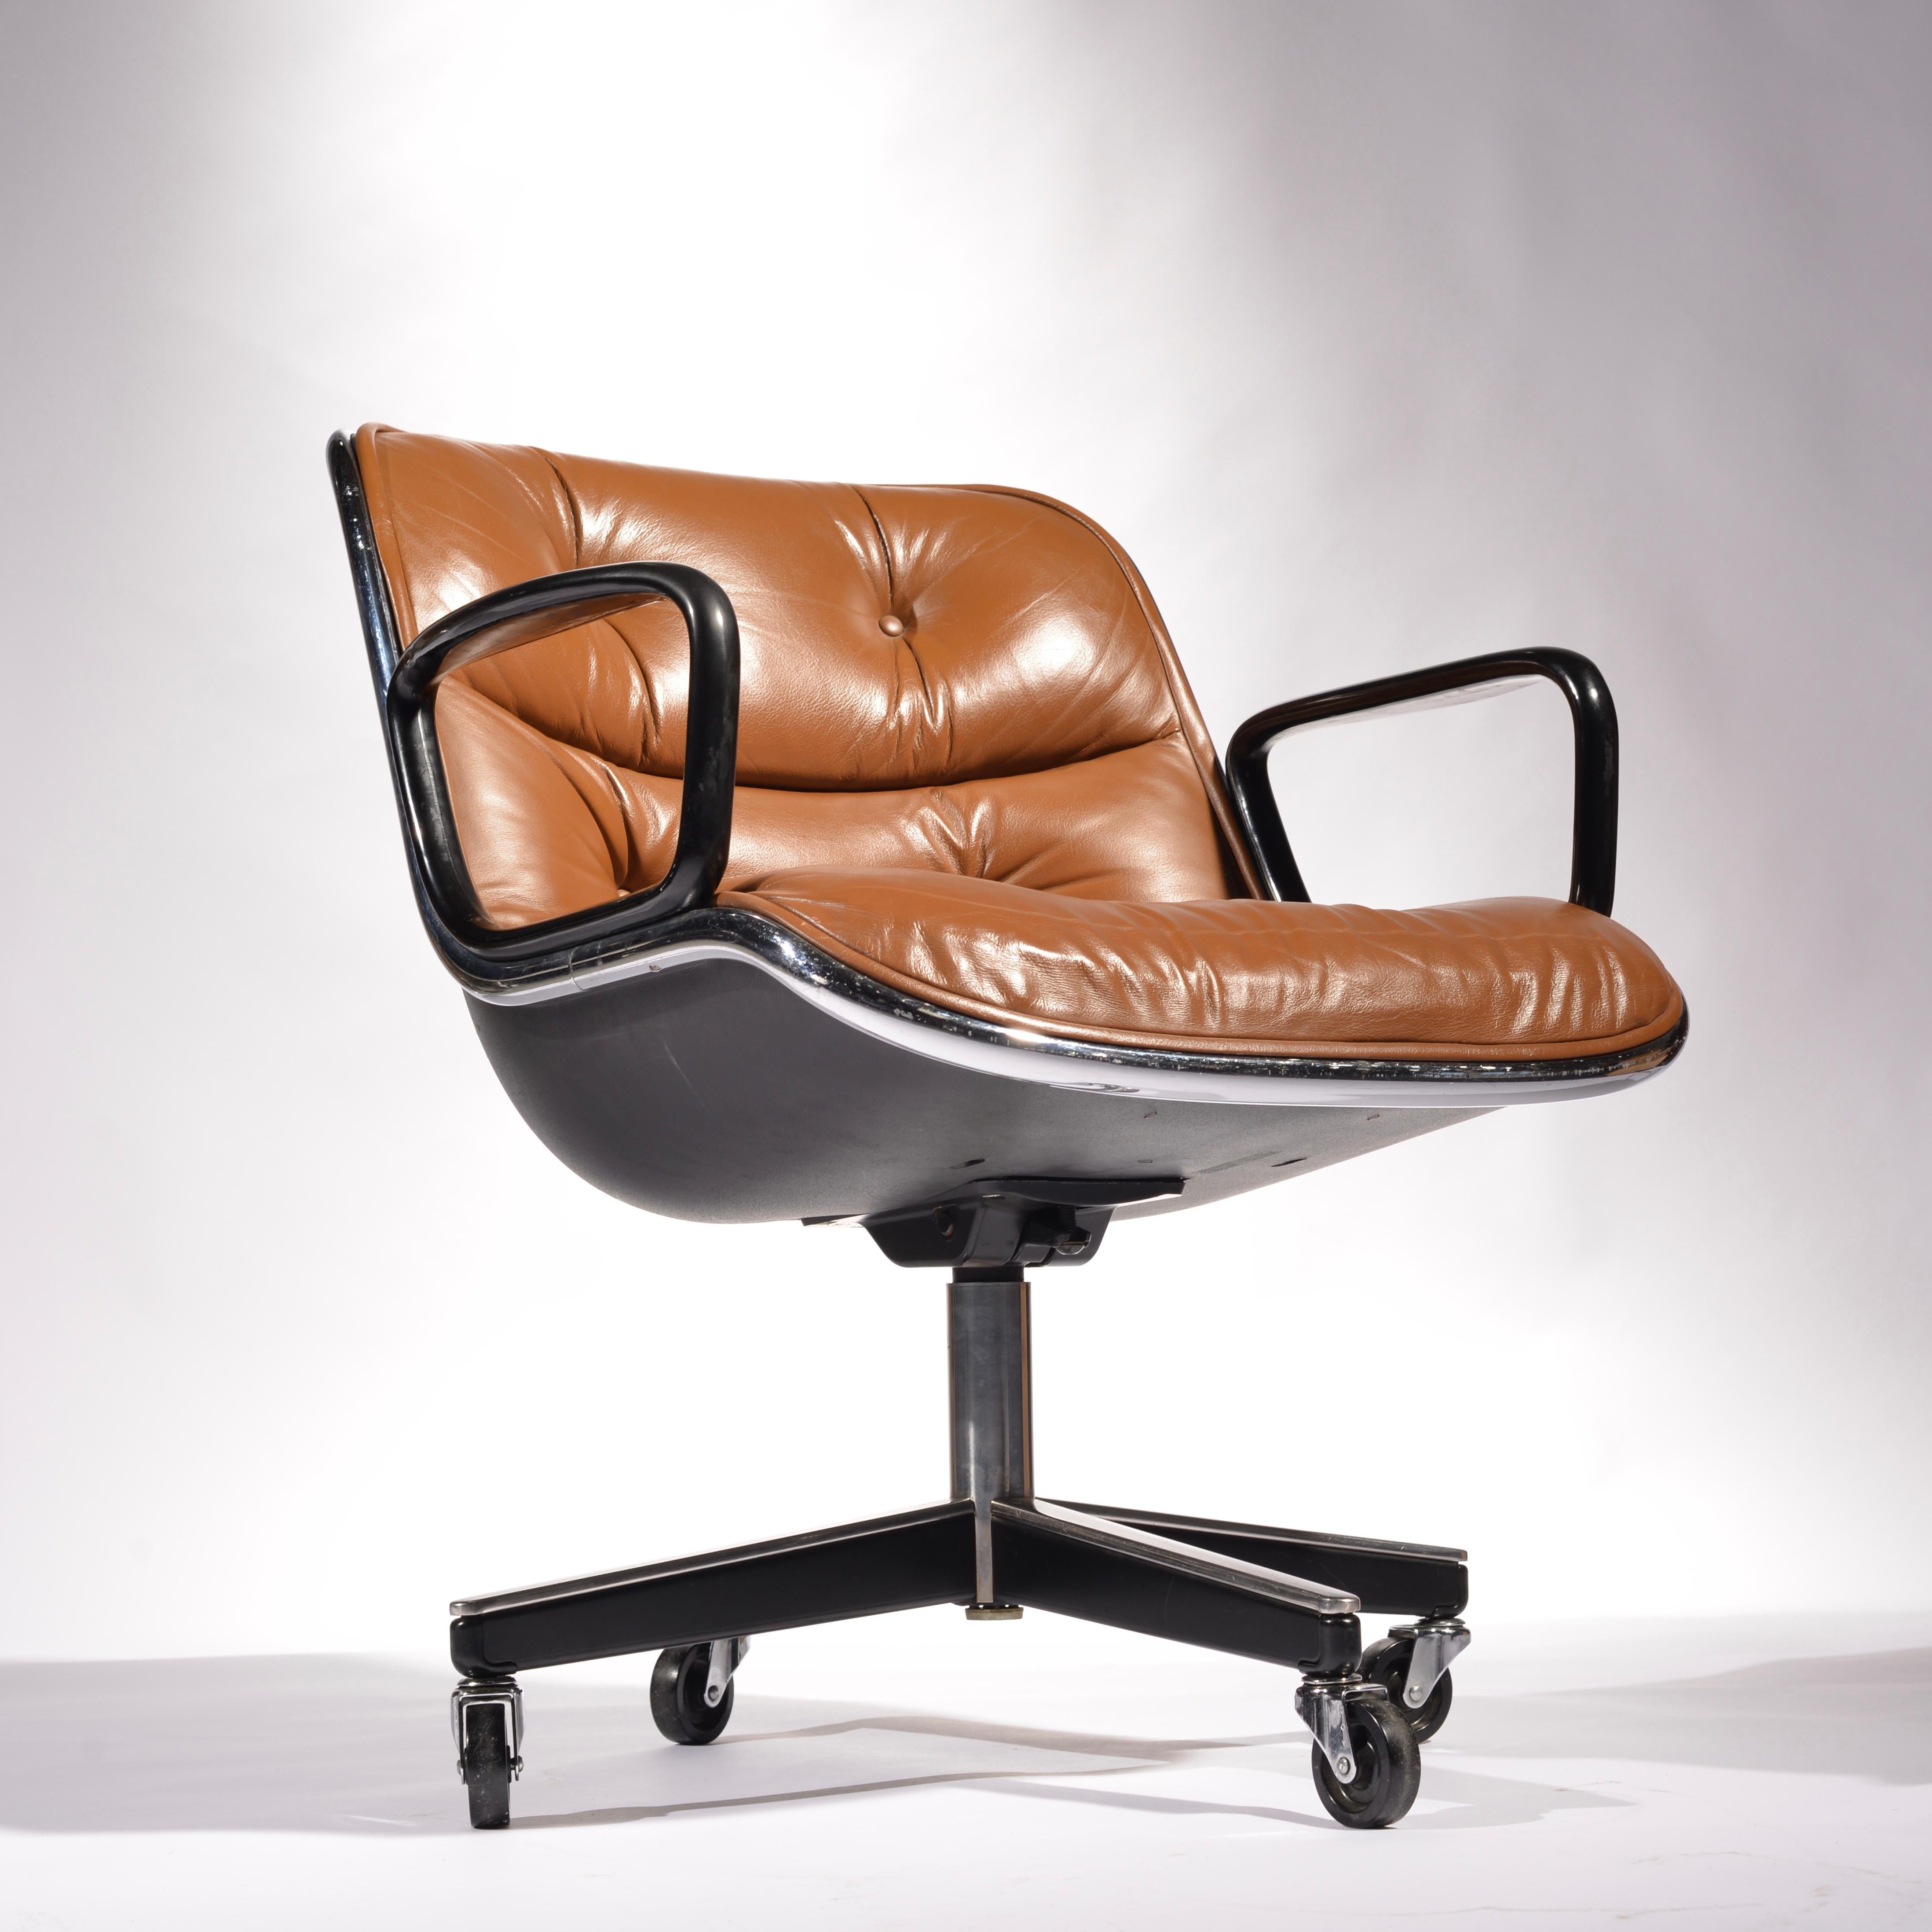 American 35 Charles Pollock Executive Desk Chairs for Knoll in Cognac Leather